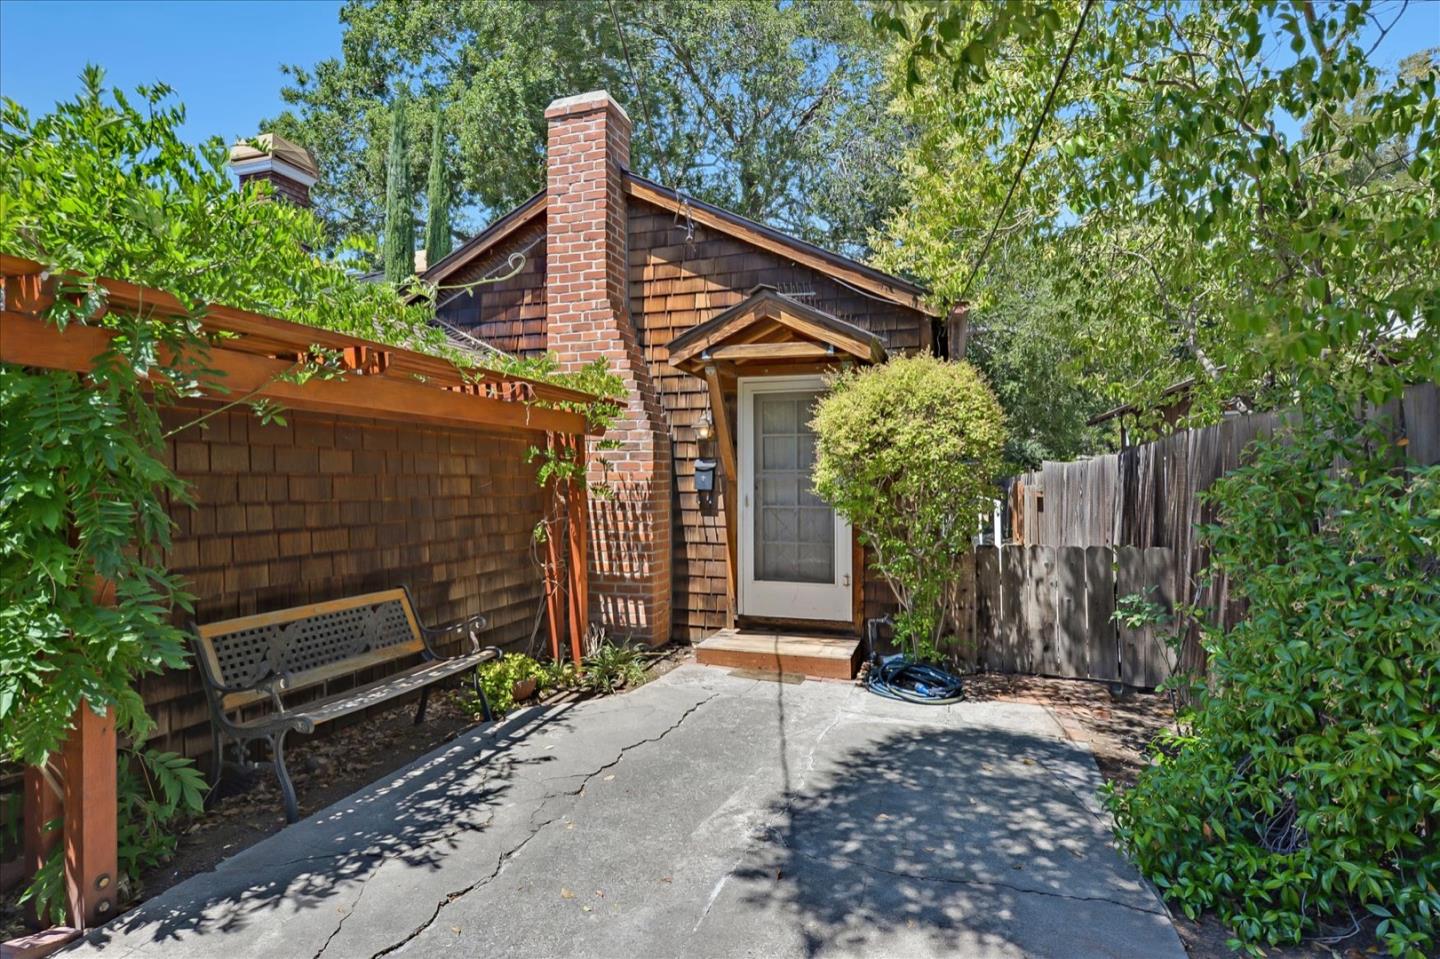 Charming 1 bedroom/1 bathroom home in the exclusive College Terrace area.  Original hardwood floors throughout and over 3700 sq ft lot!  Great potential close to Stanford, shopping & dining.  Outbuilding could be used possibly as an office - sq ft not included as part of the house. Don't miss this opportunity!